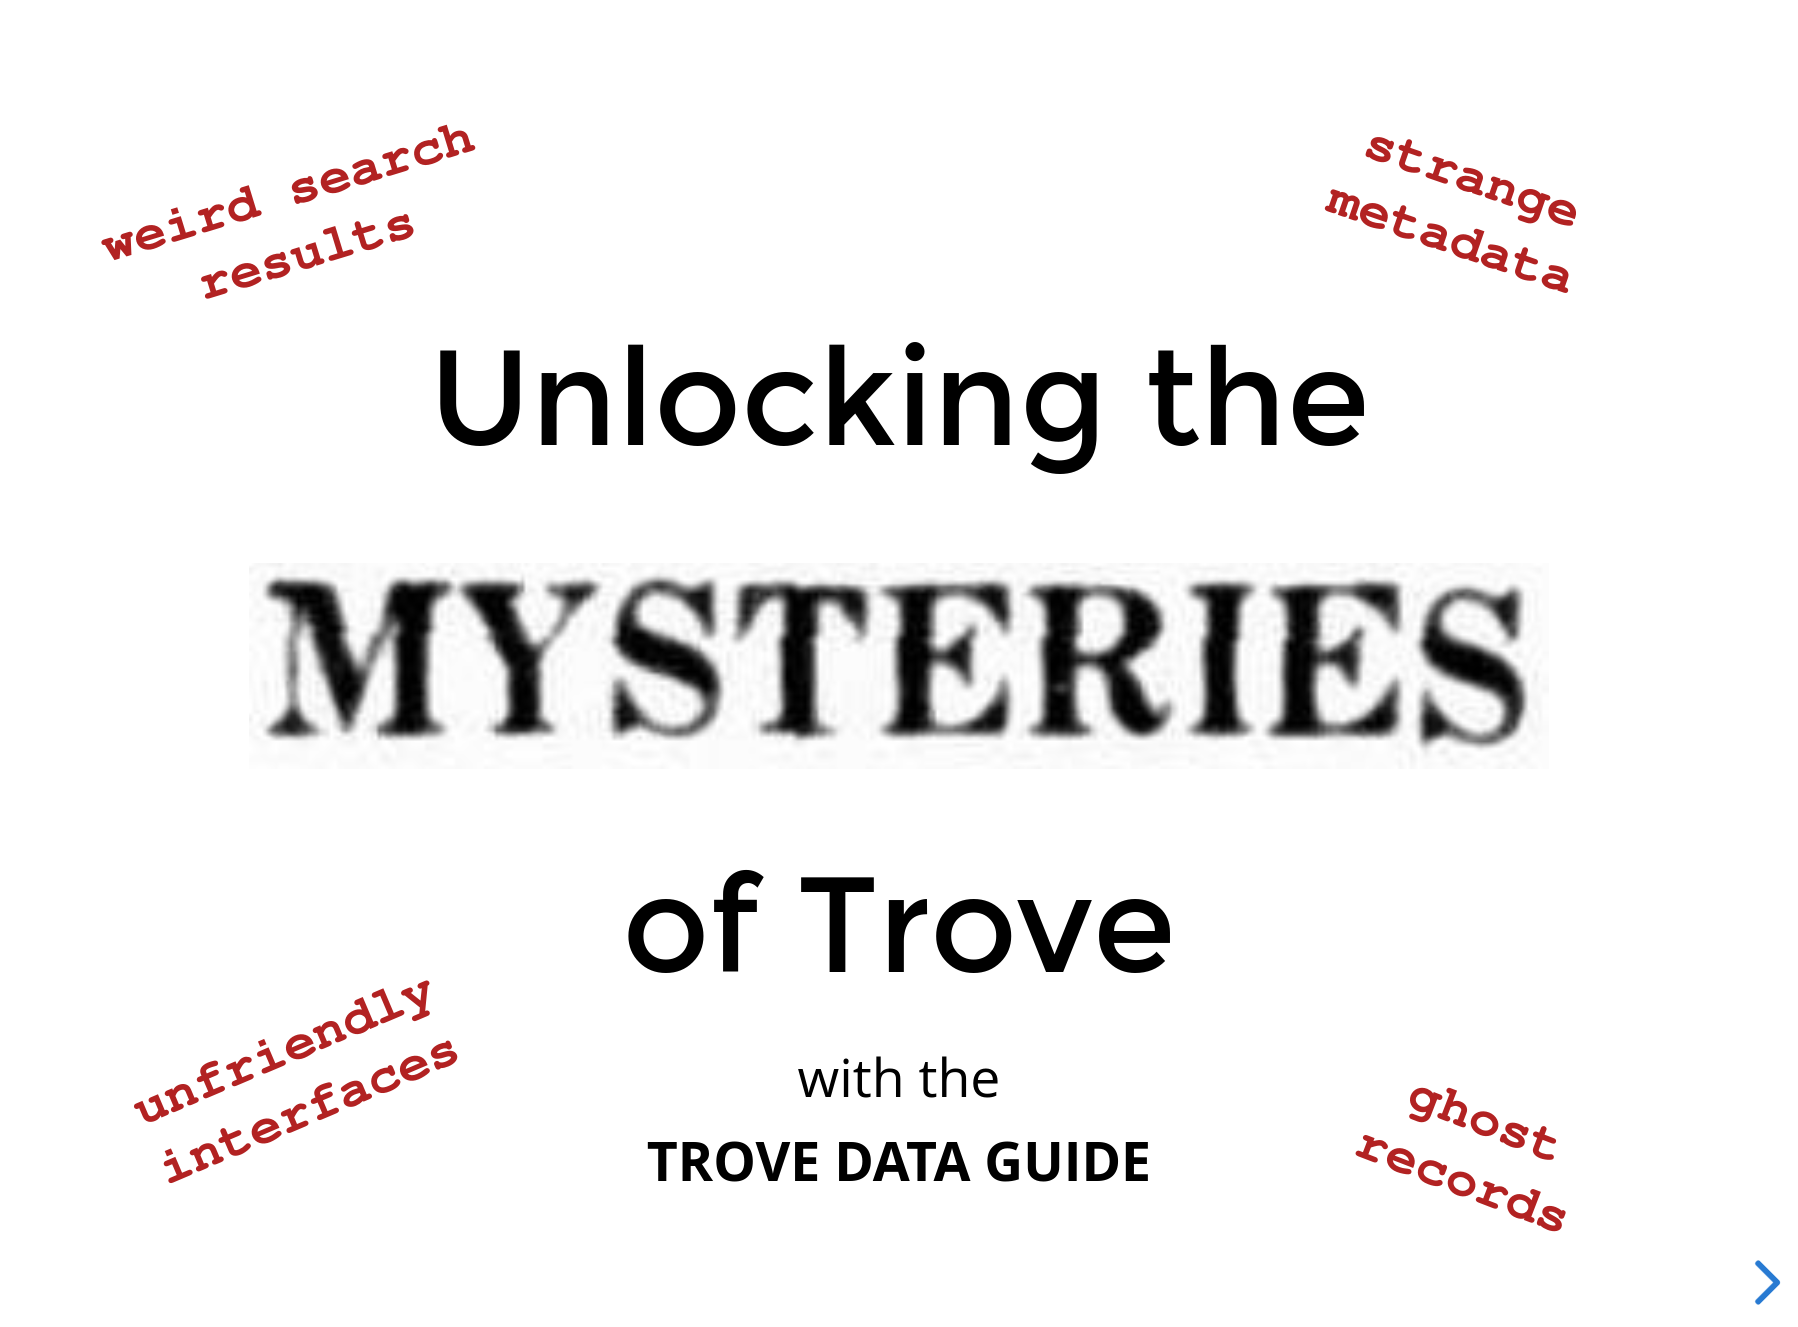 Cover slide of my presentation on the mysteries of Trove